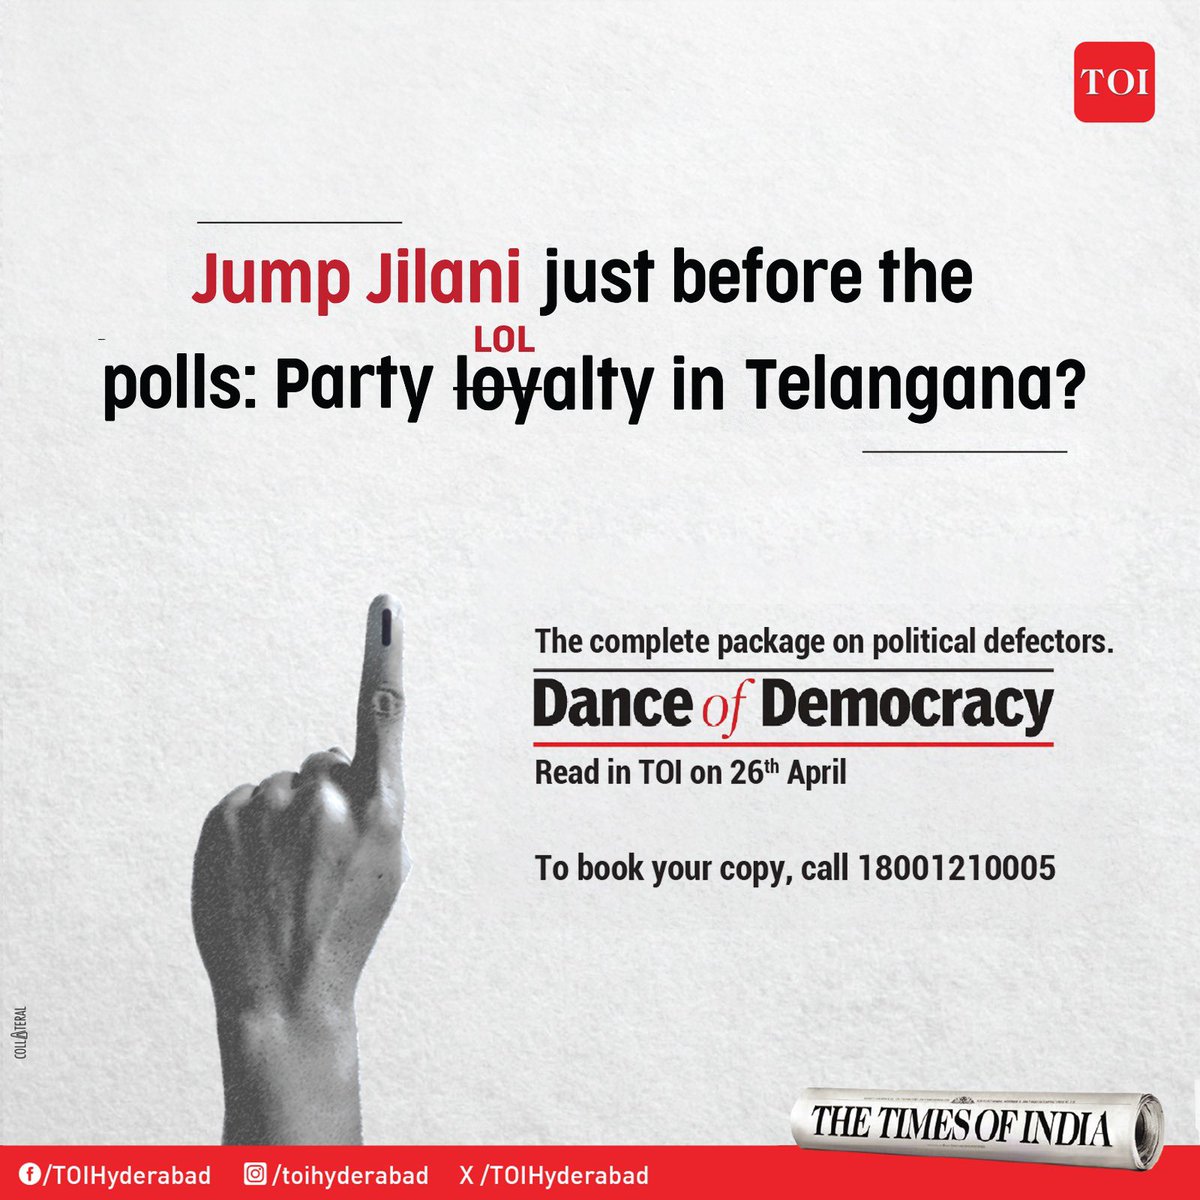 Get the complete package on Telangana's pre-poll defections in the special #DanceofDemocracy capsule on Friday, 26th April in #TOIHyderabad. #Elections2024 @timesofindia